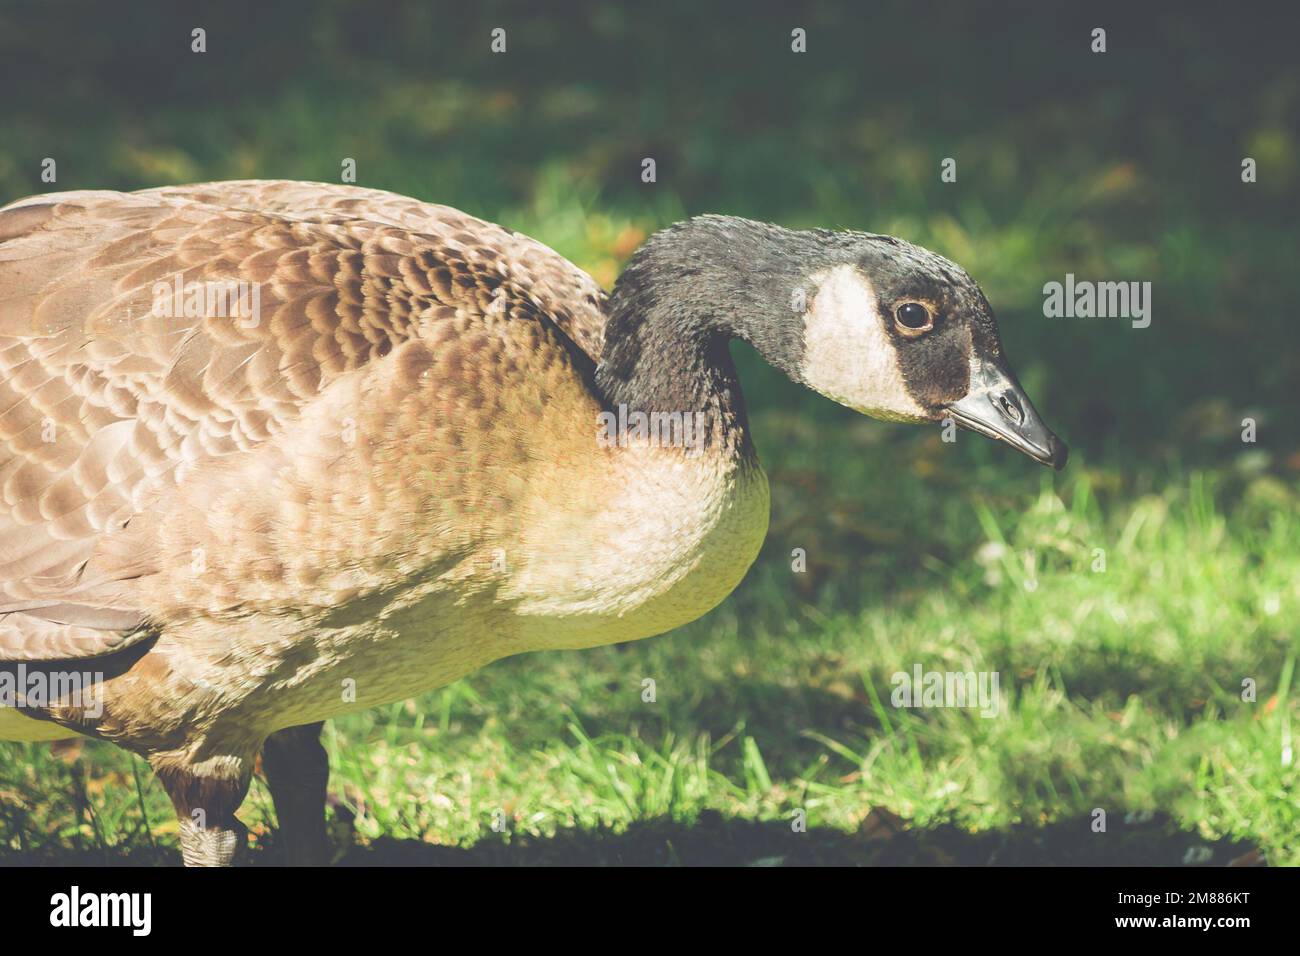 Canada goose with bent neck on grass Stock Photo